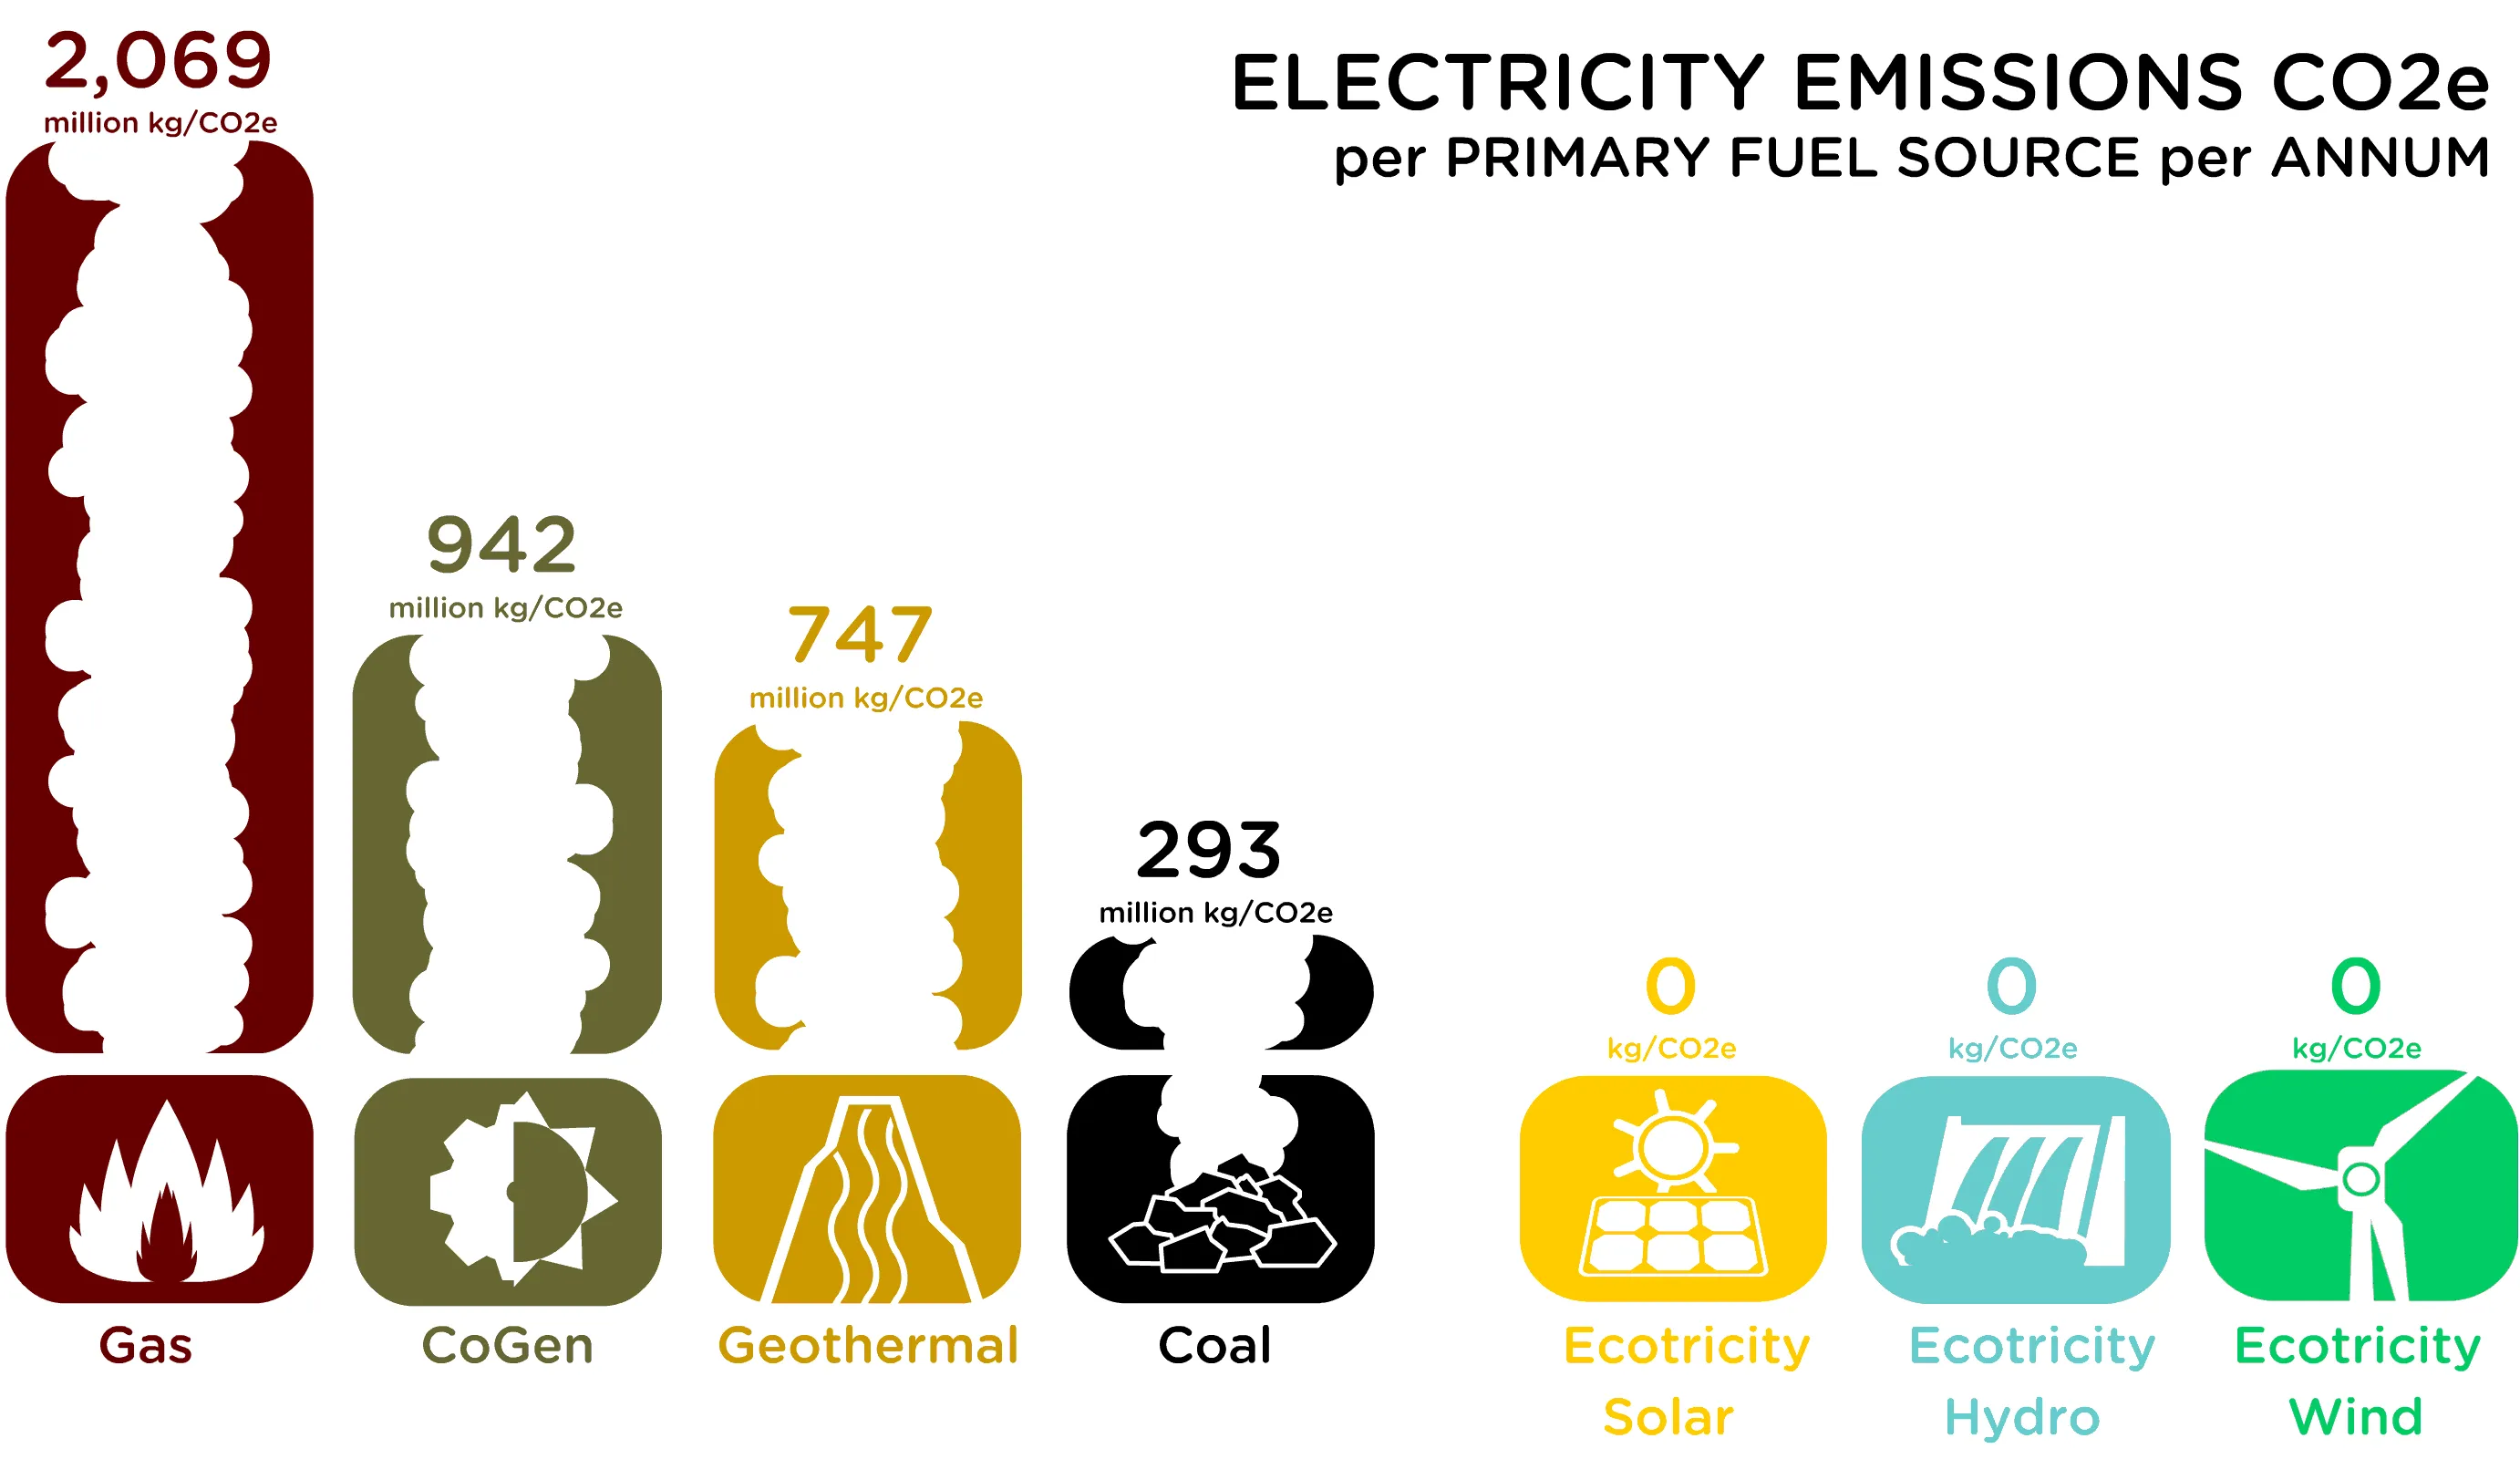 Electricity emissions